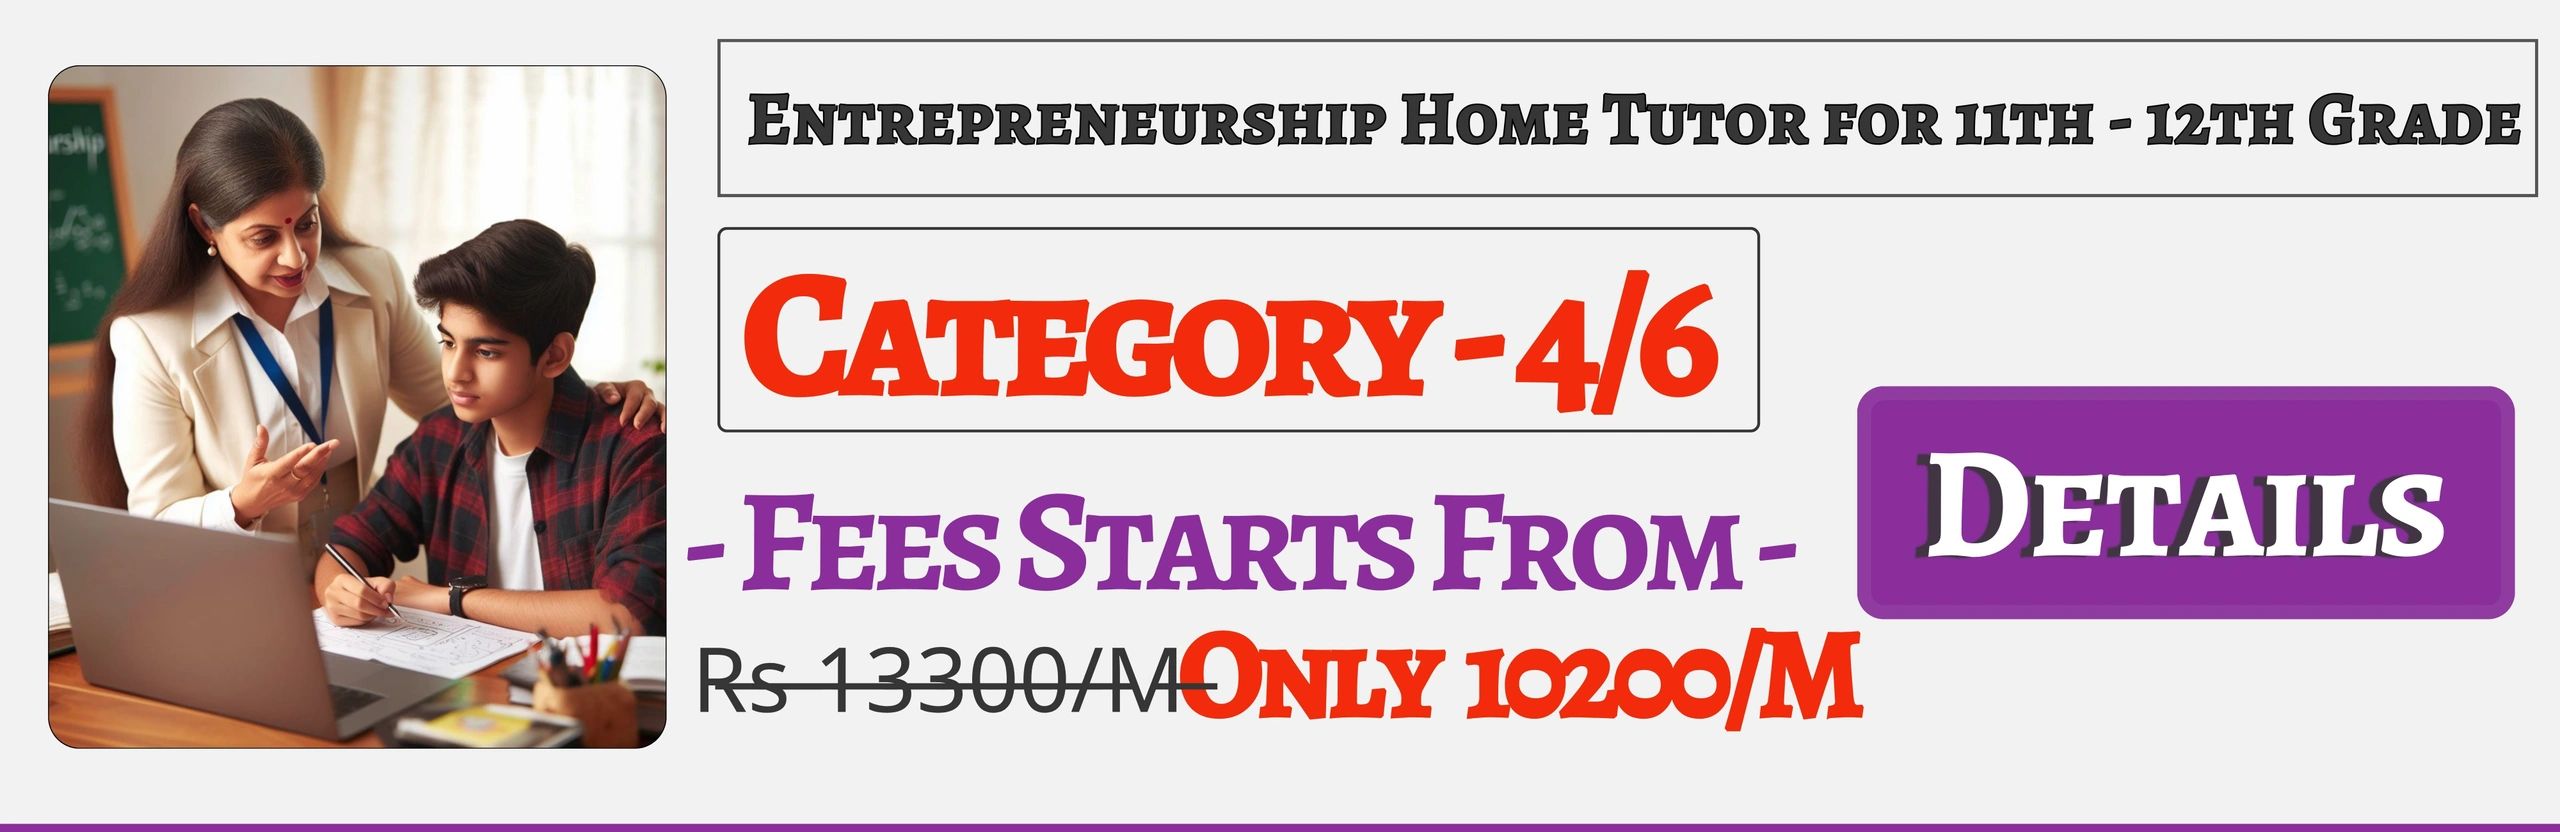 Book Best Nearby Entrepreneurship Home Tuition Tutors For 11th & 12th In Jaipur , Fees Only 10200/M